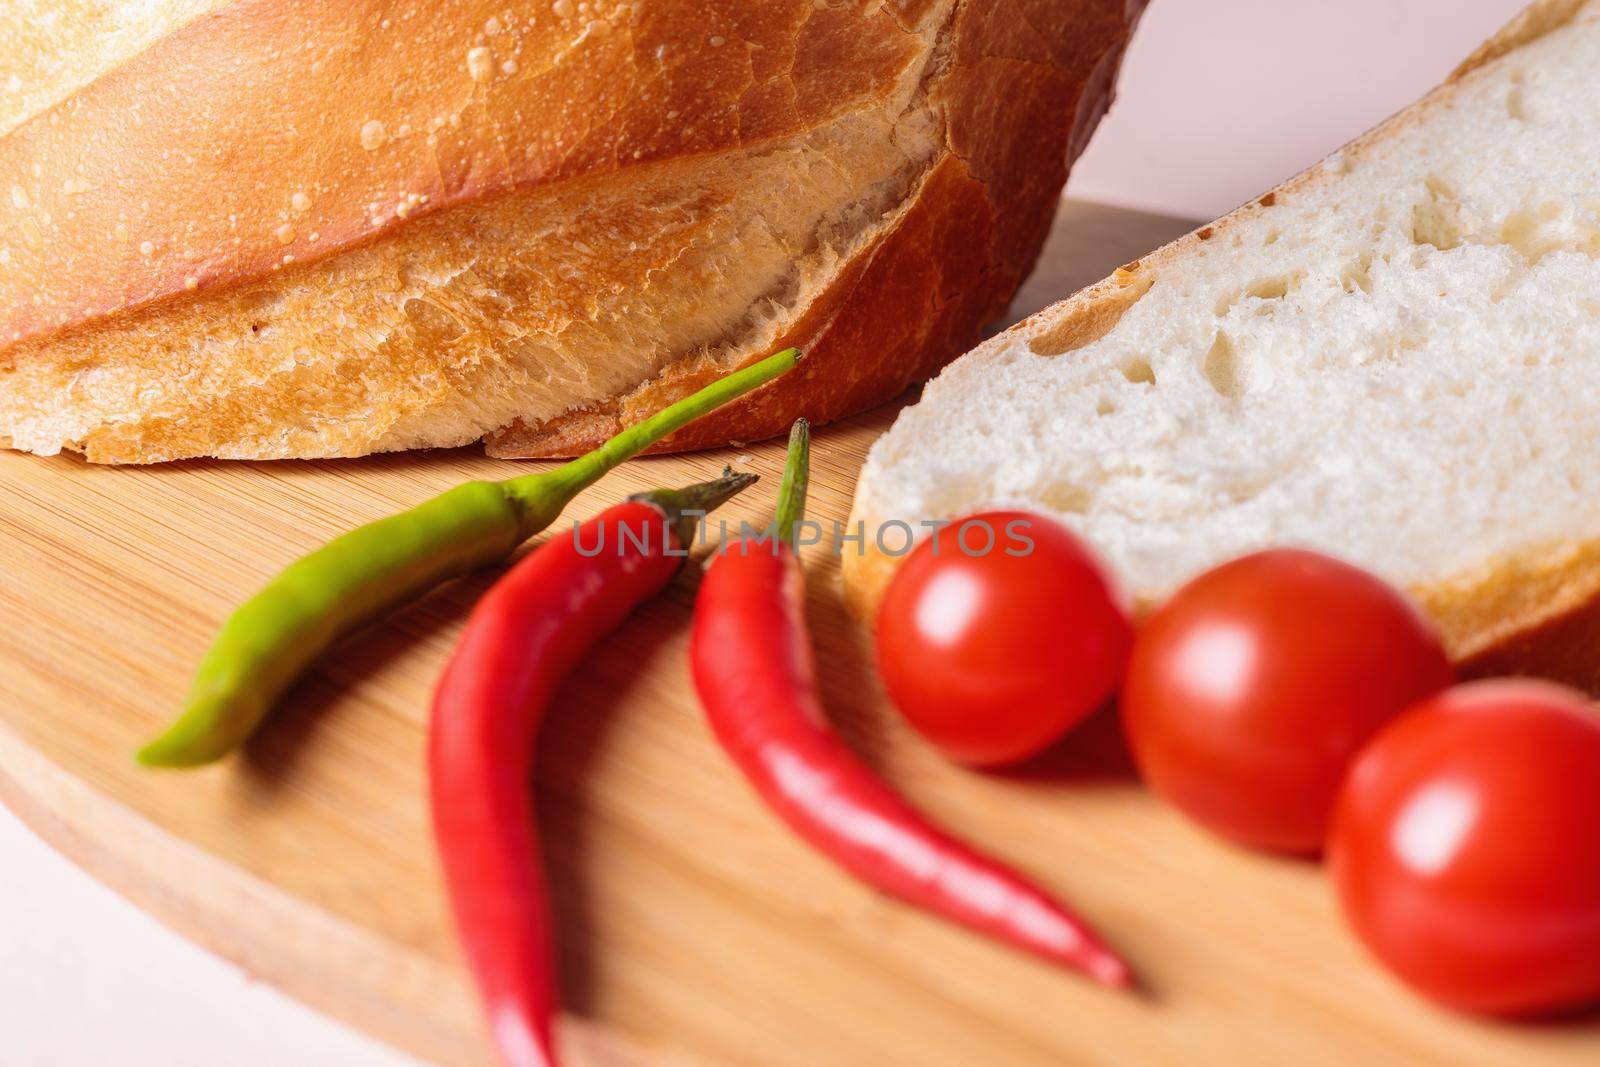 Sliced pieces of white bread with red peppers and tomatoes on a cutting board by Yurich32